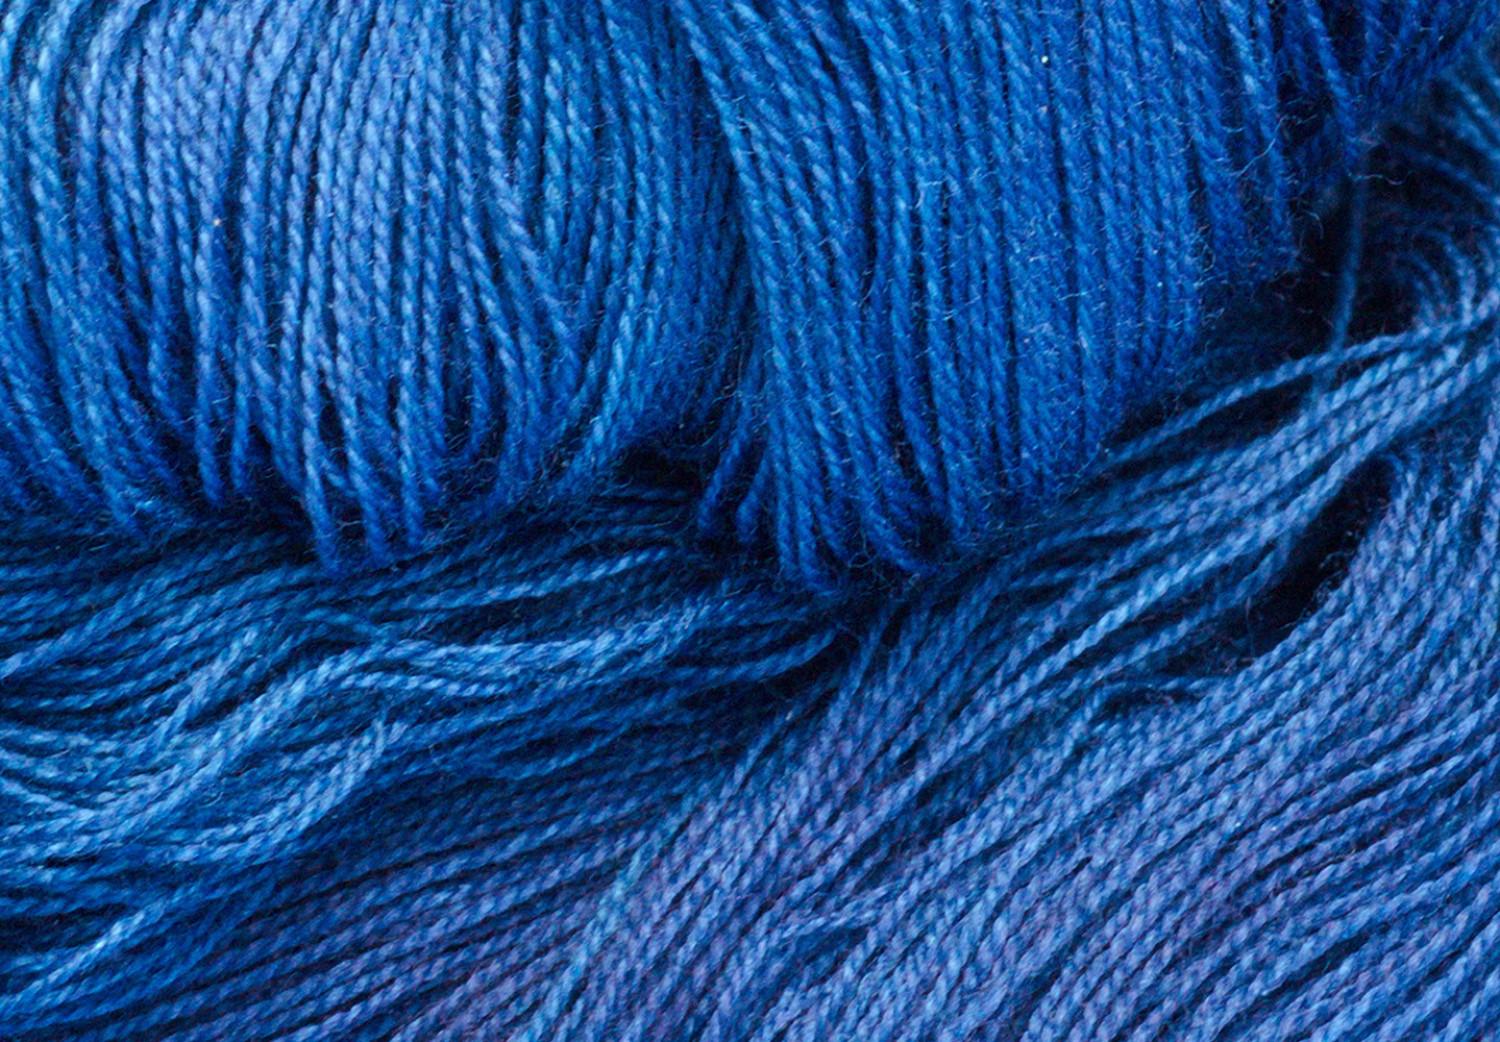 Poster Blue Yarn - winter composition with a ball of navy wool